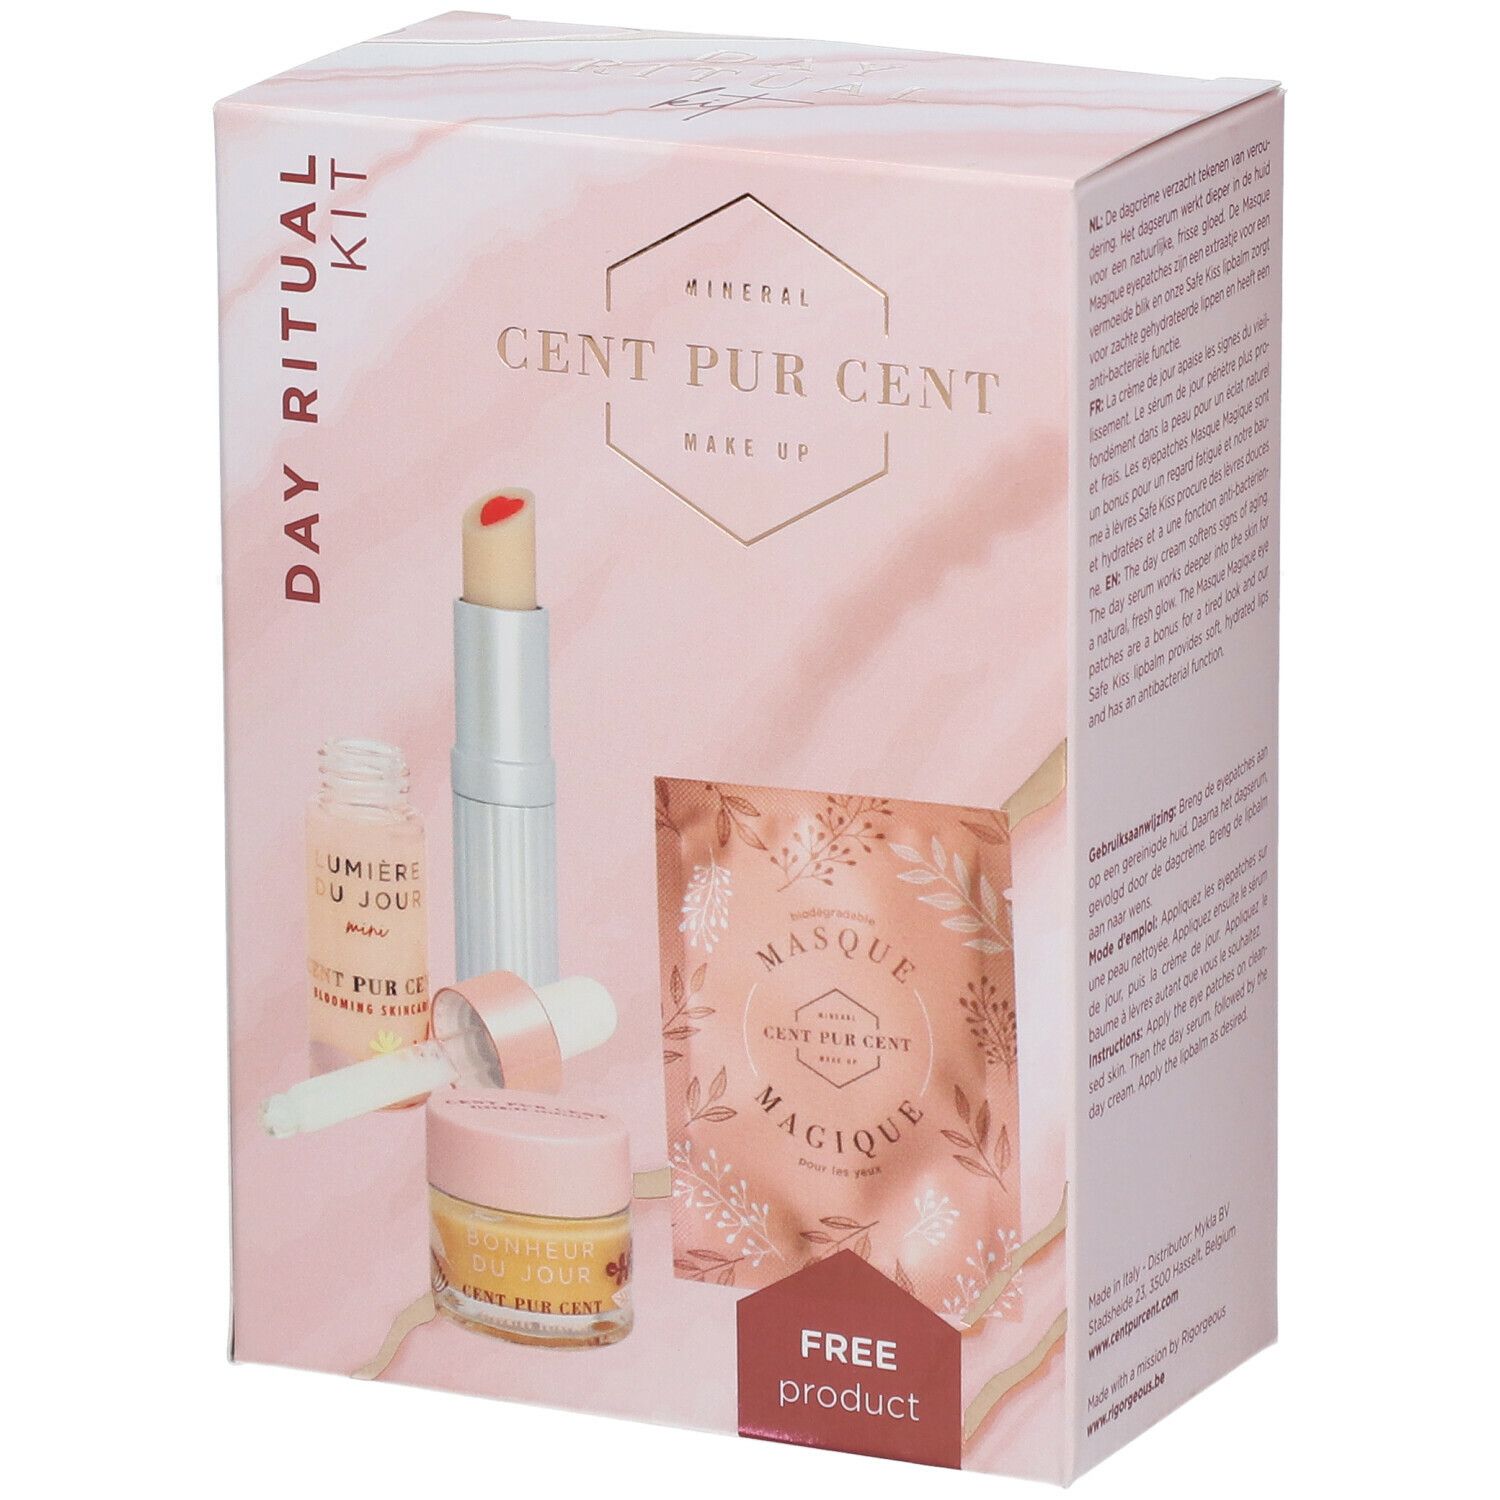 Cent Pur Cent Day Ritual Kit